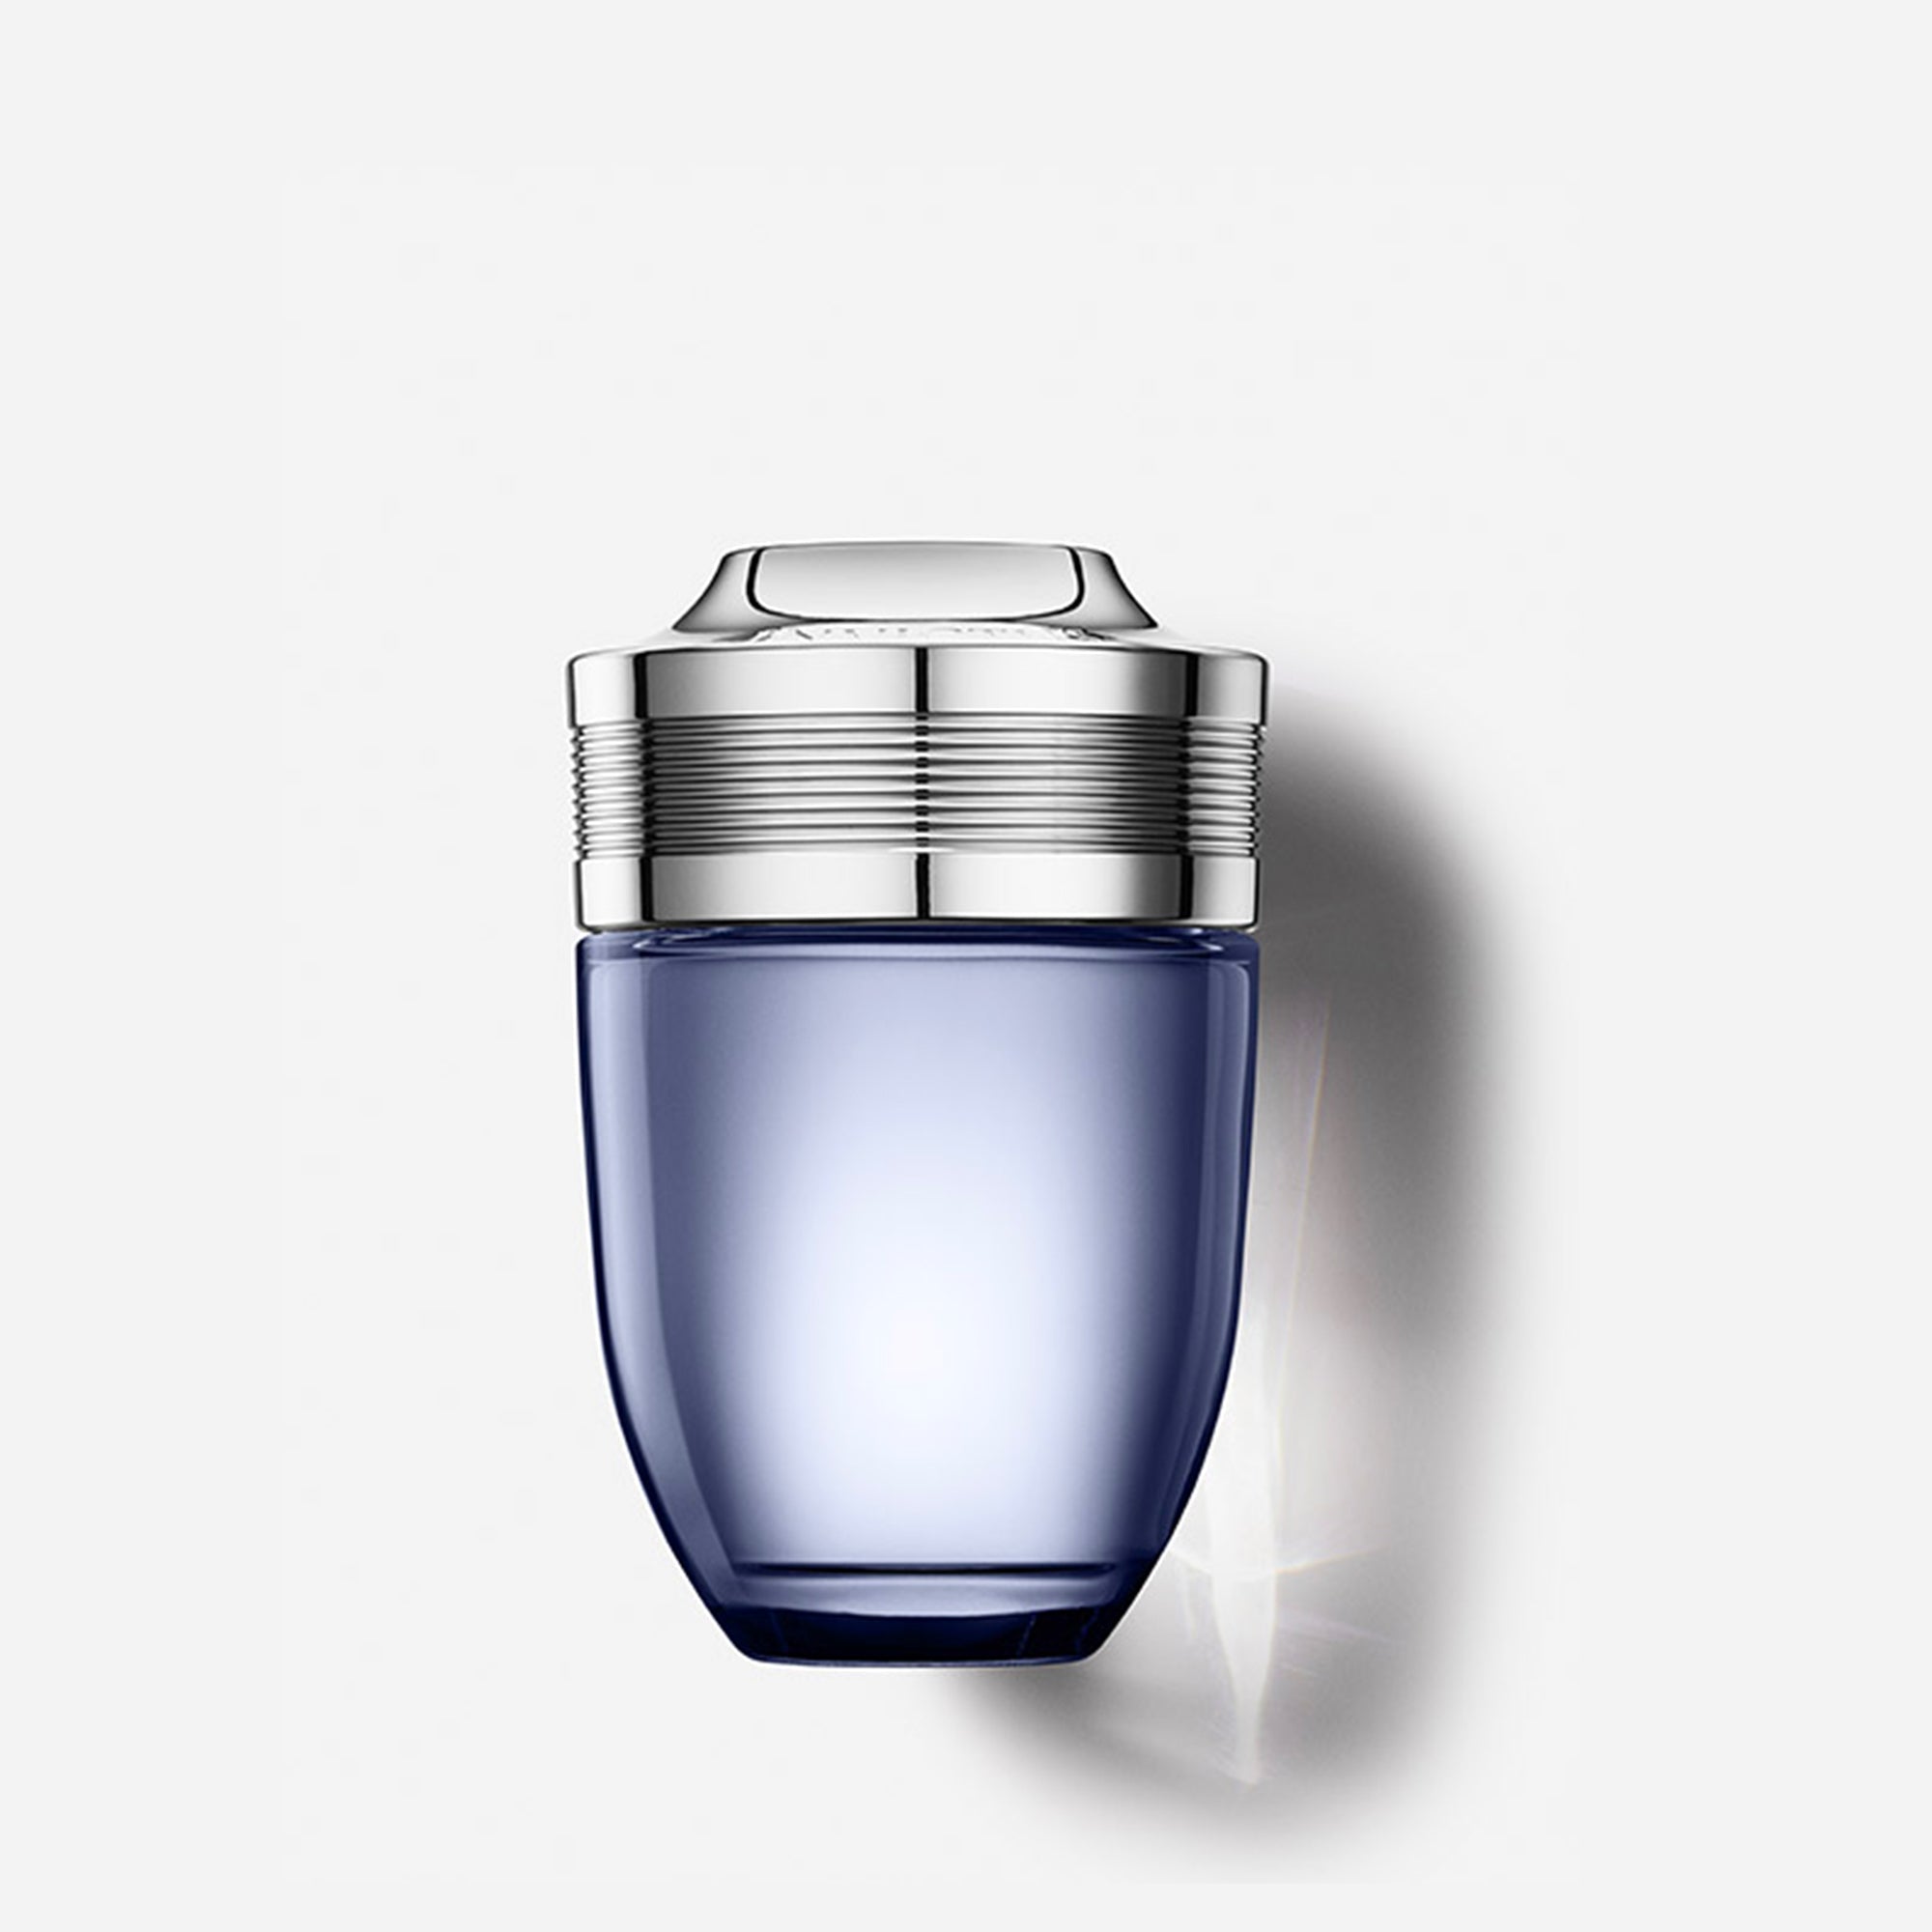 Paco Rabanne Invictus After Shave Lotion | My Perfume Shop Australia